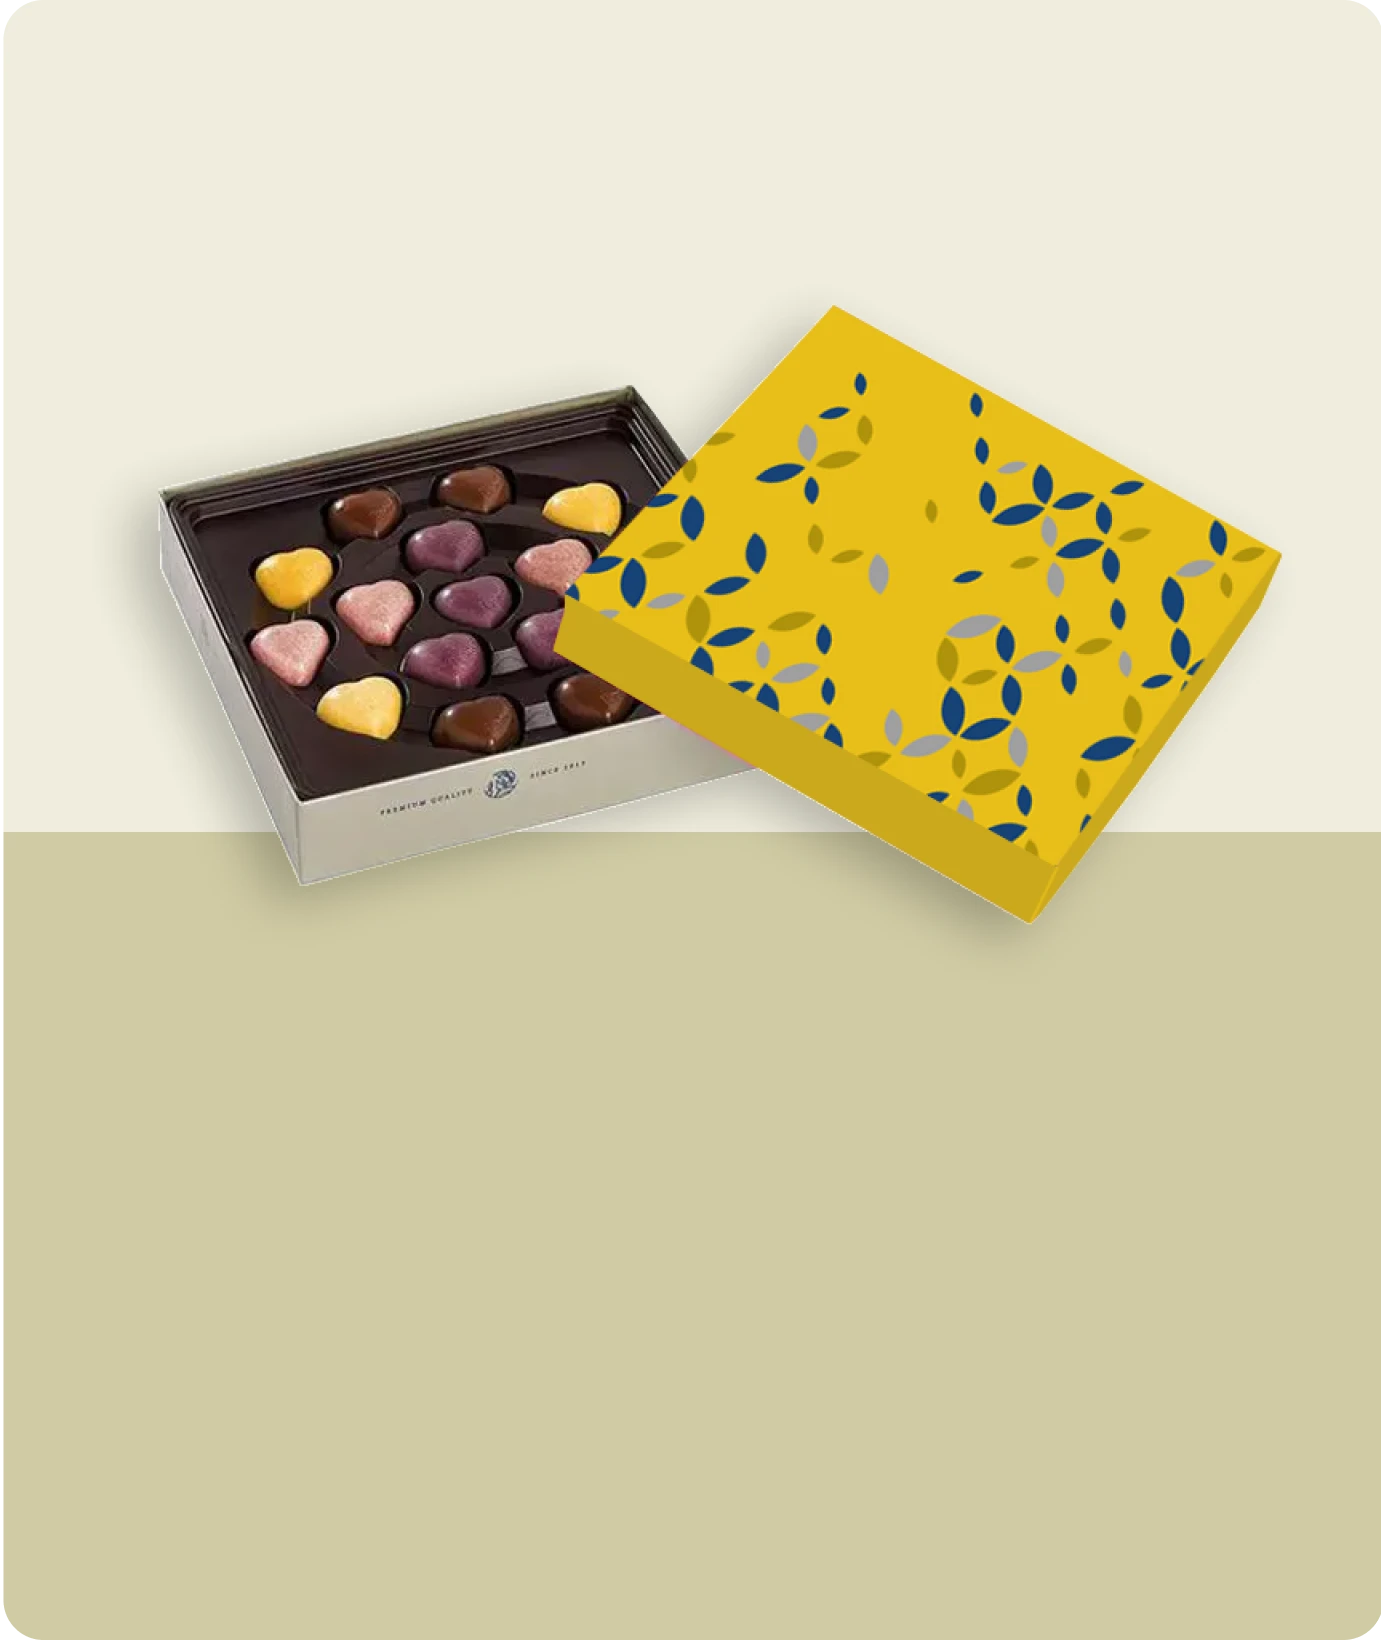 Chocolate Candy Boxes related products image | The Box Lane